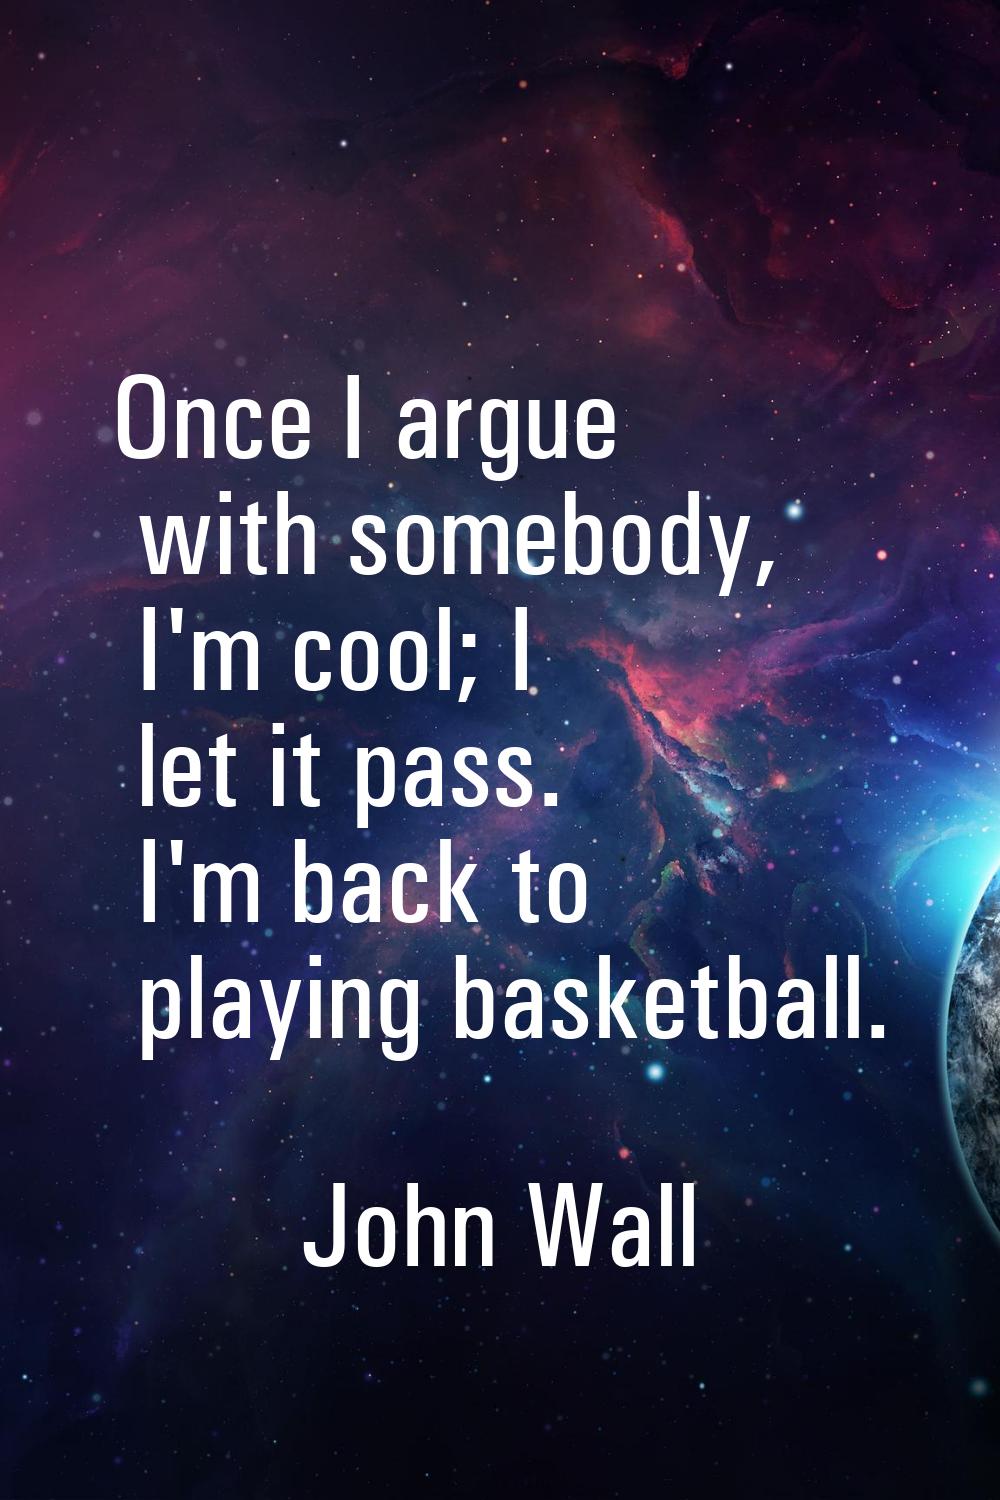 Once I argue with somebody, I'm cool; I let it pass. I'm back to playing basketball.